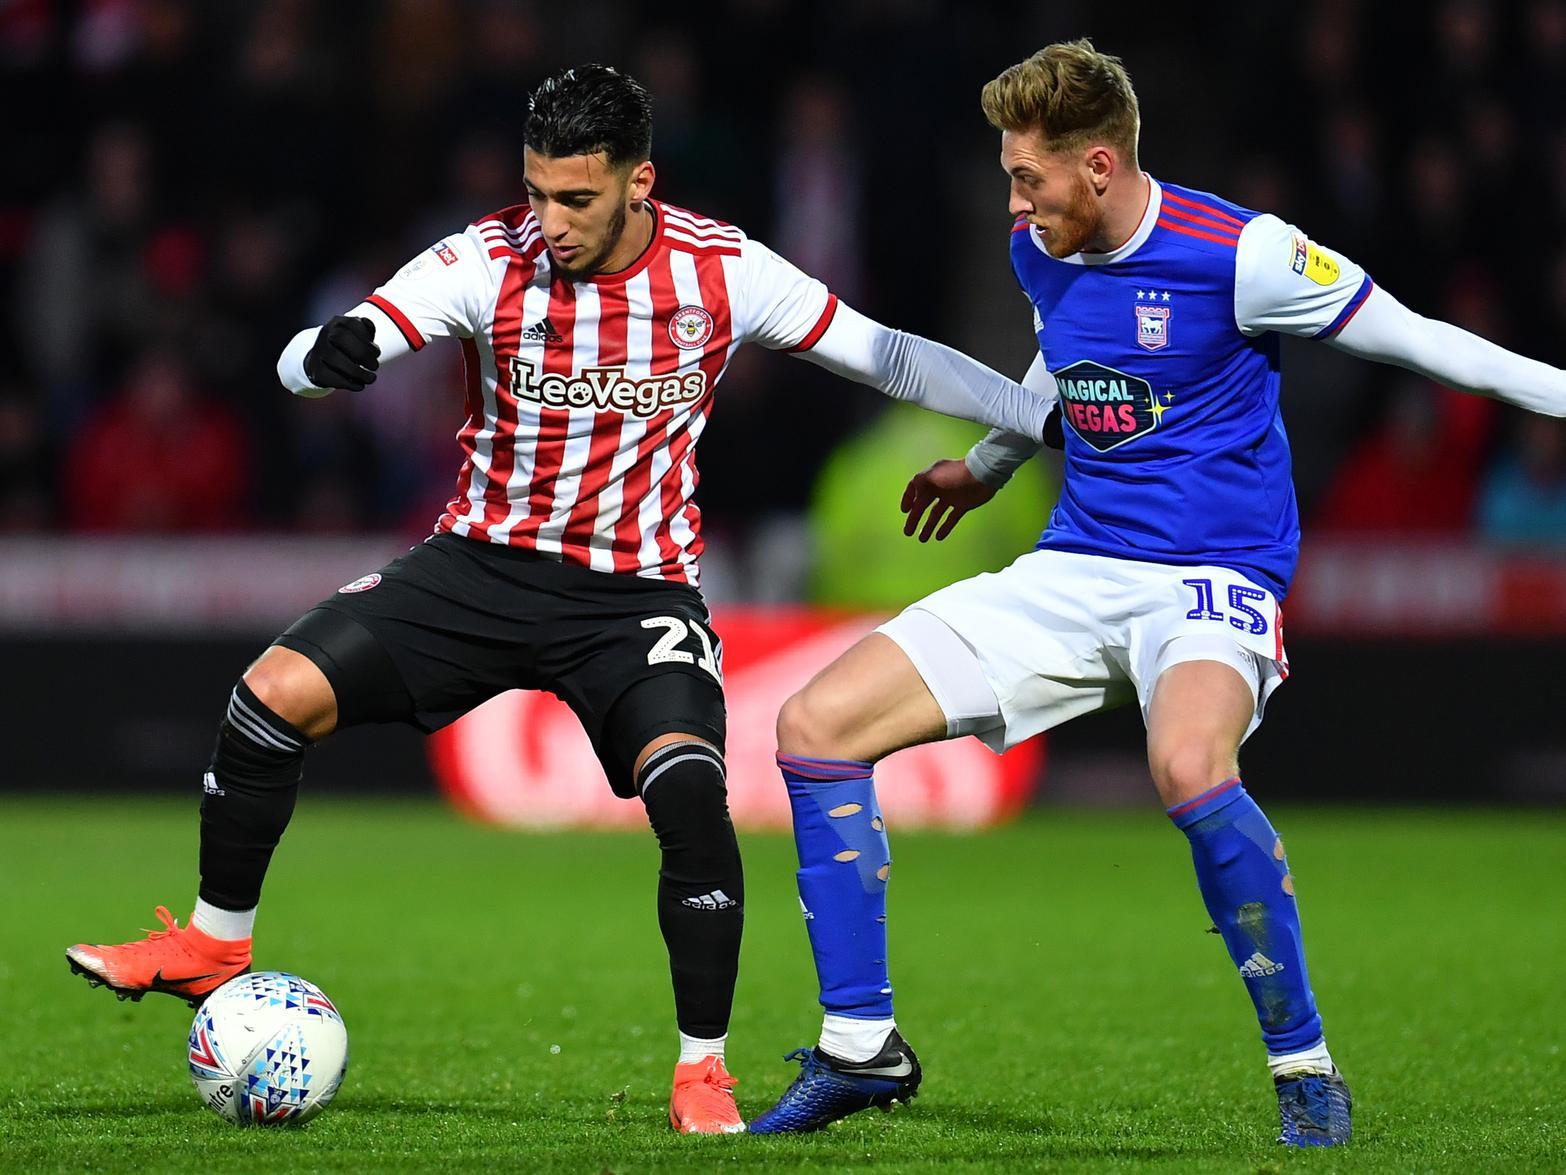 Arsenal are the latest side to take an interest in Brentford sensation Said Benrahma, and could look to bulldoze their way past Newcastle and Leicester to sign him this summer. (Telegraph)